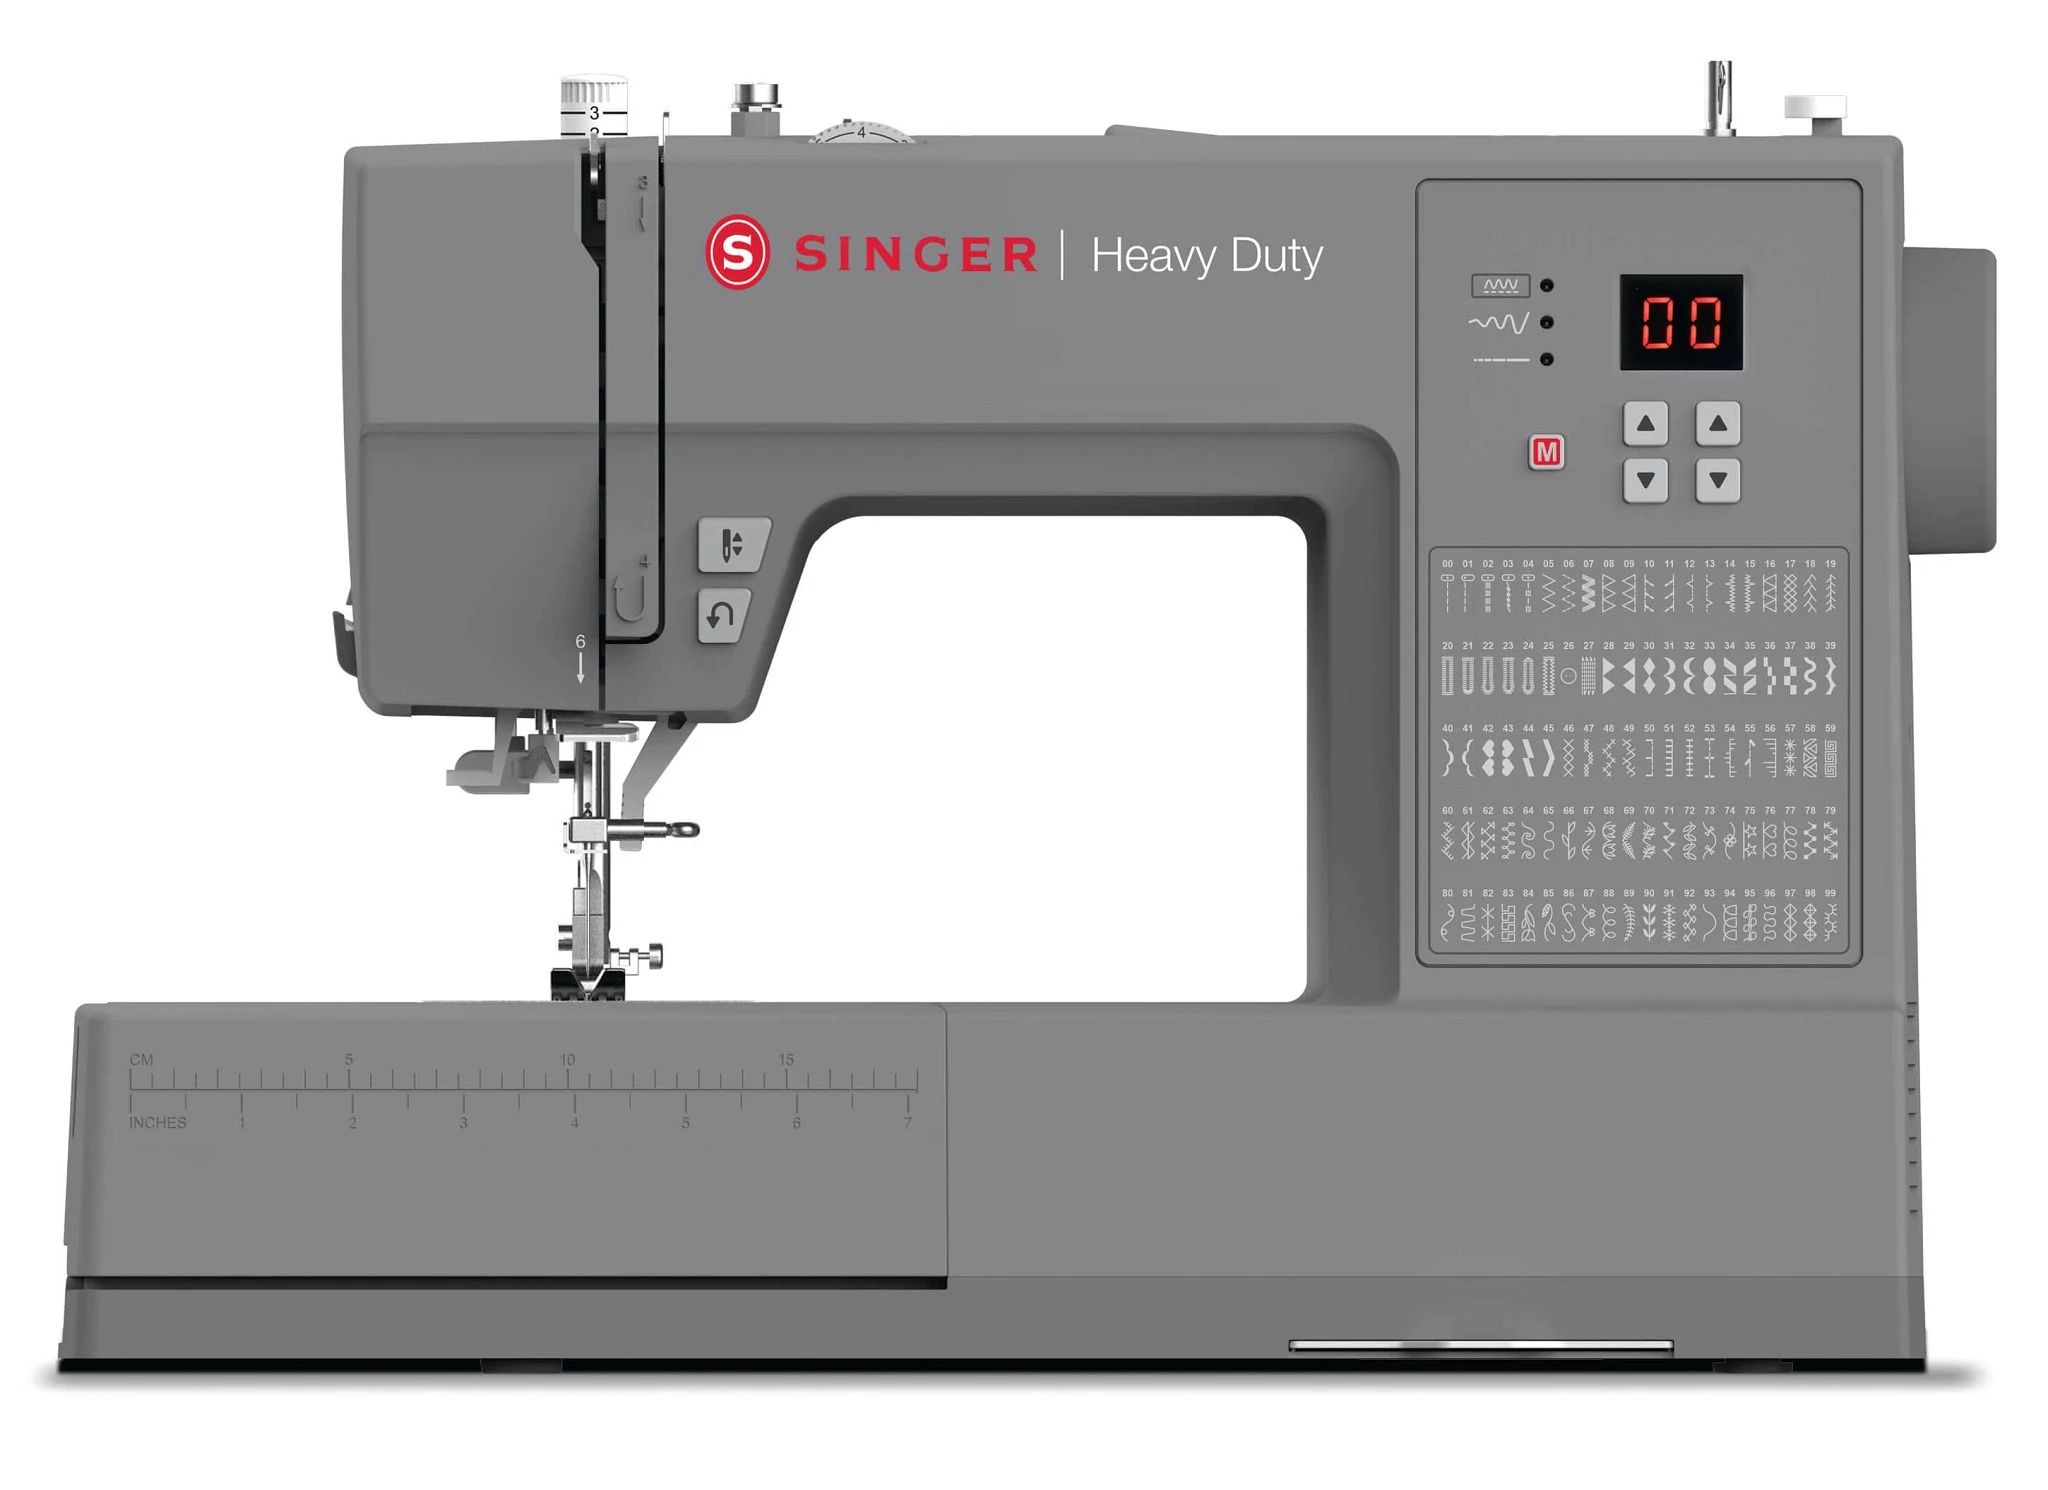 Singer Heavy Duty 44S Sewing Machine - Certified Refurbished - Coupon  Codes, Promo Codes, Daily Deals, Save Money Today